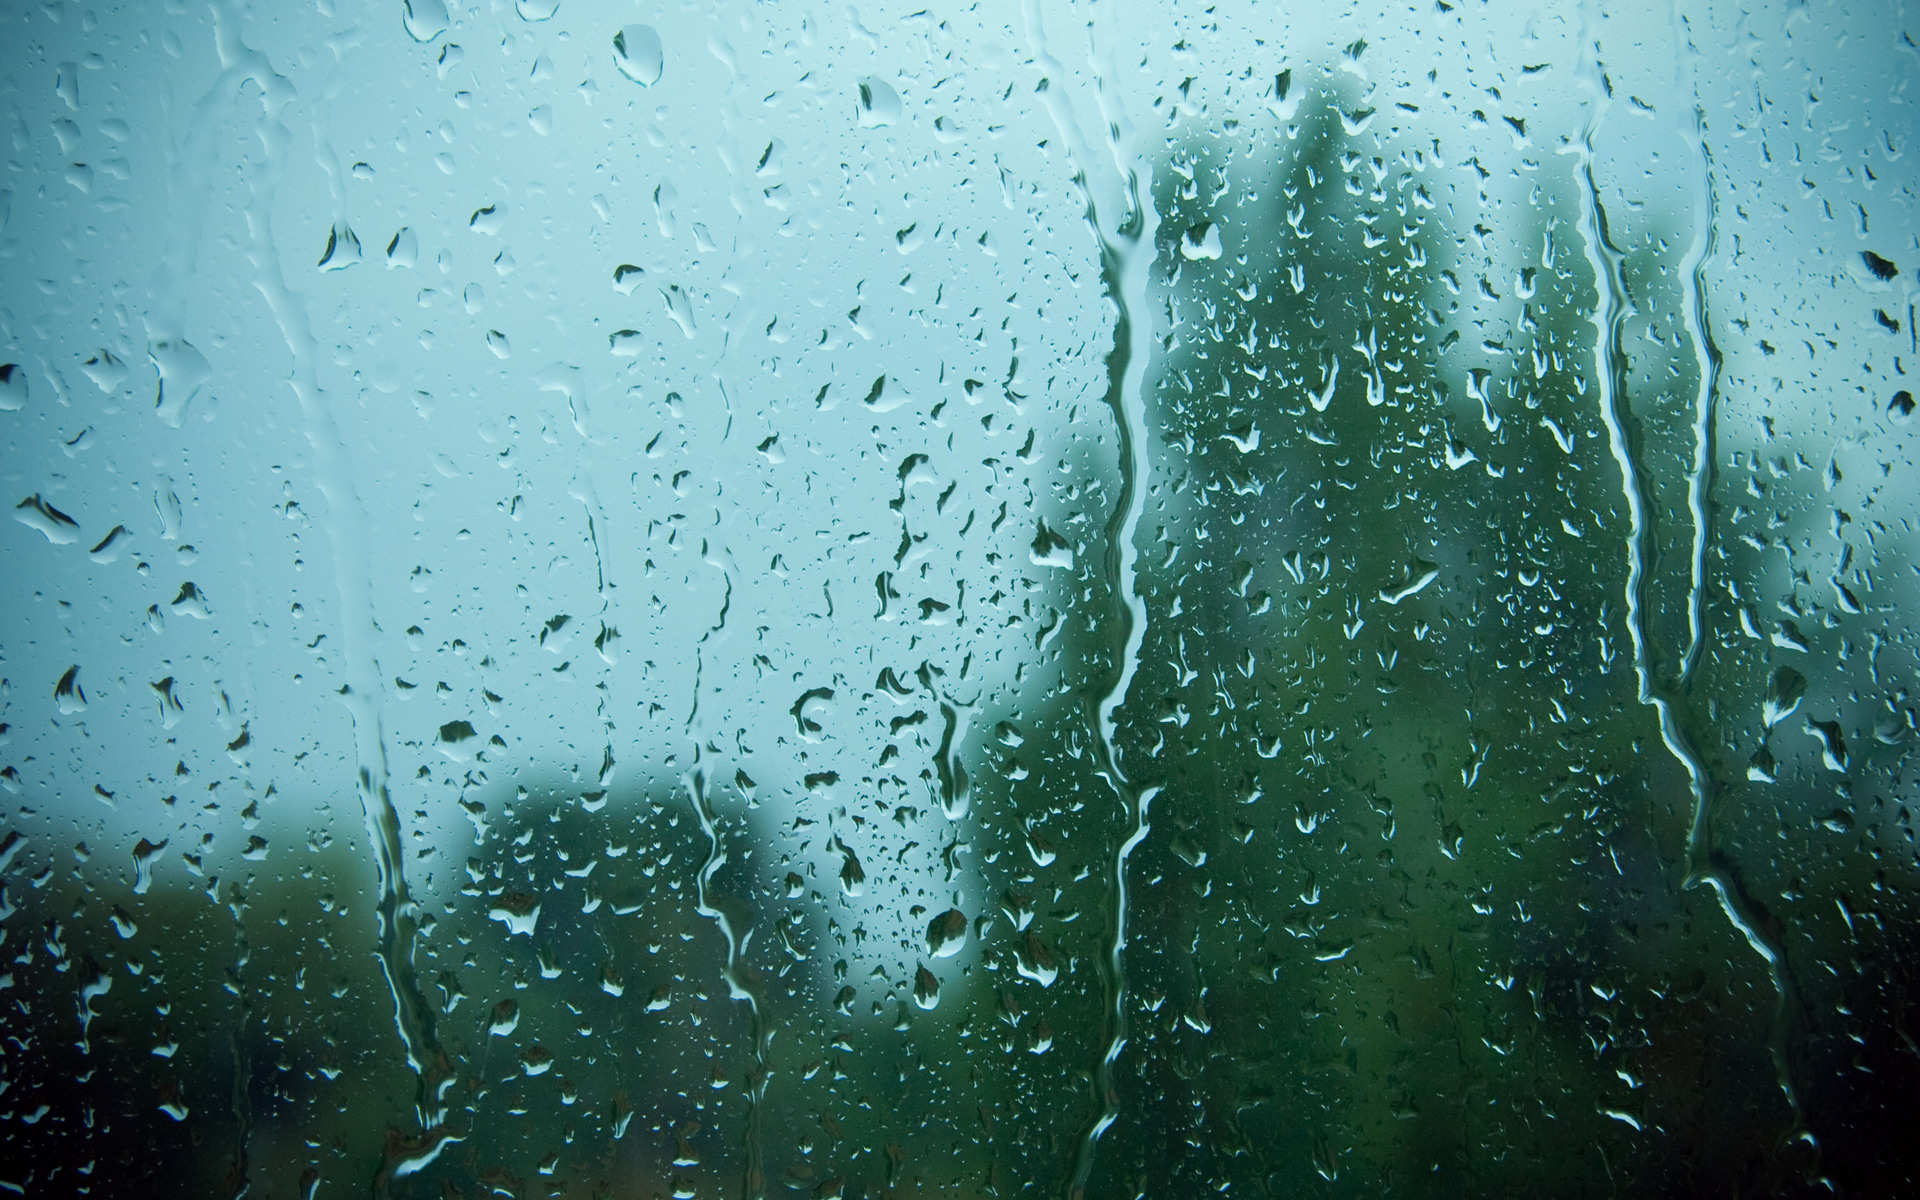 Rain On Window HD Wallpaper You Are Ing The Abstract